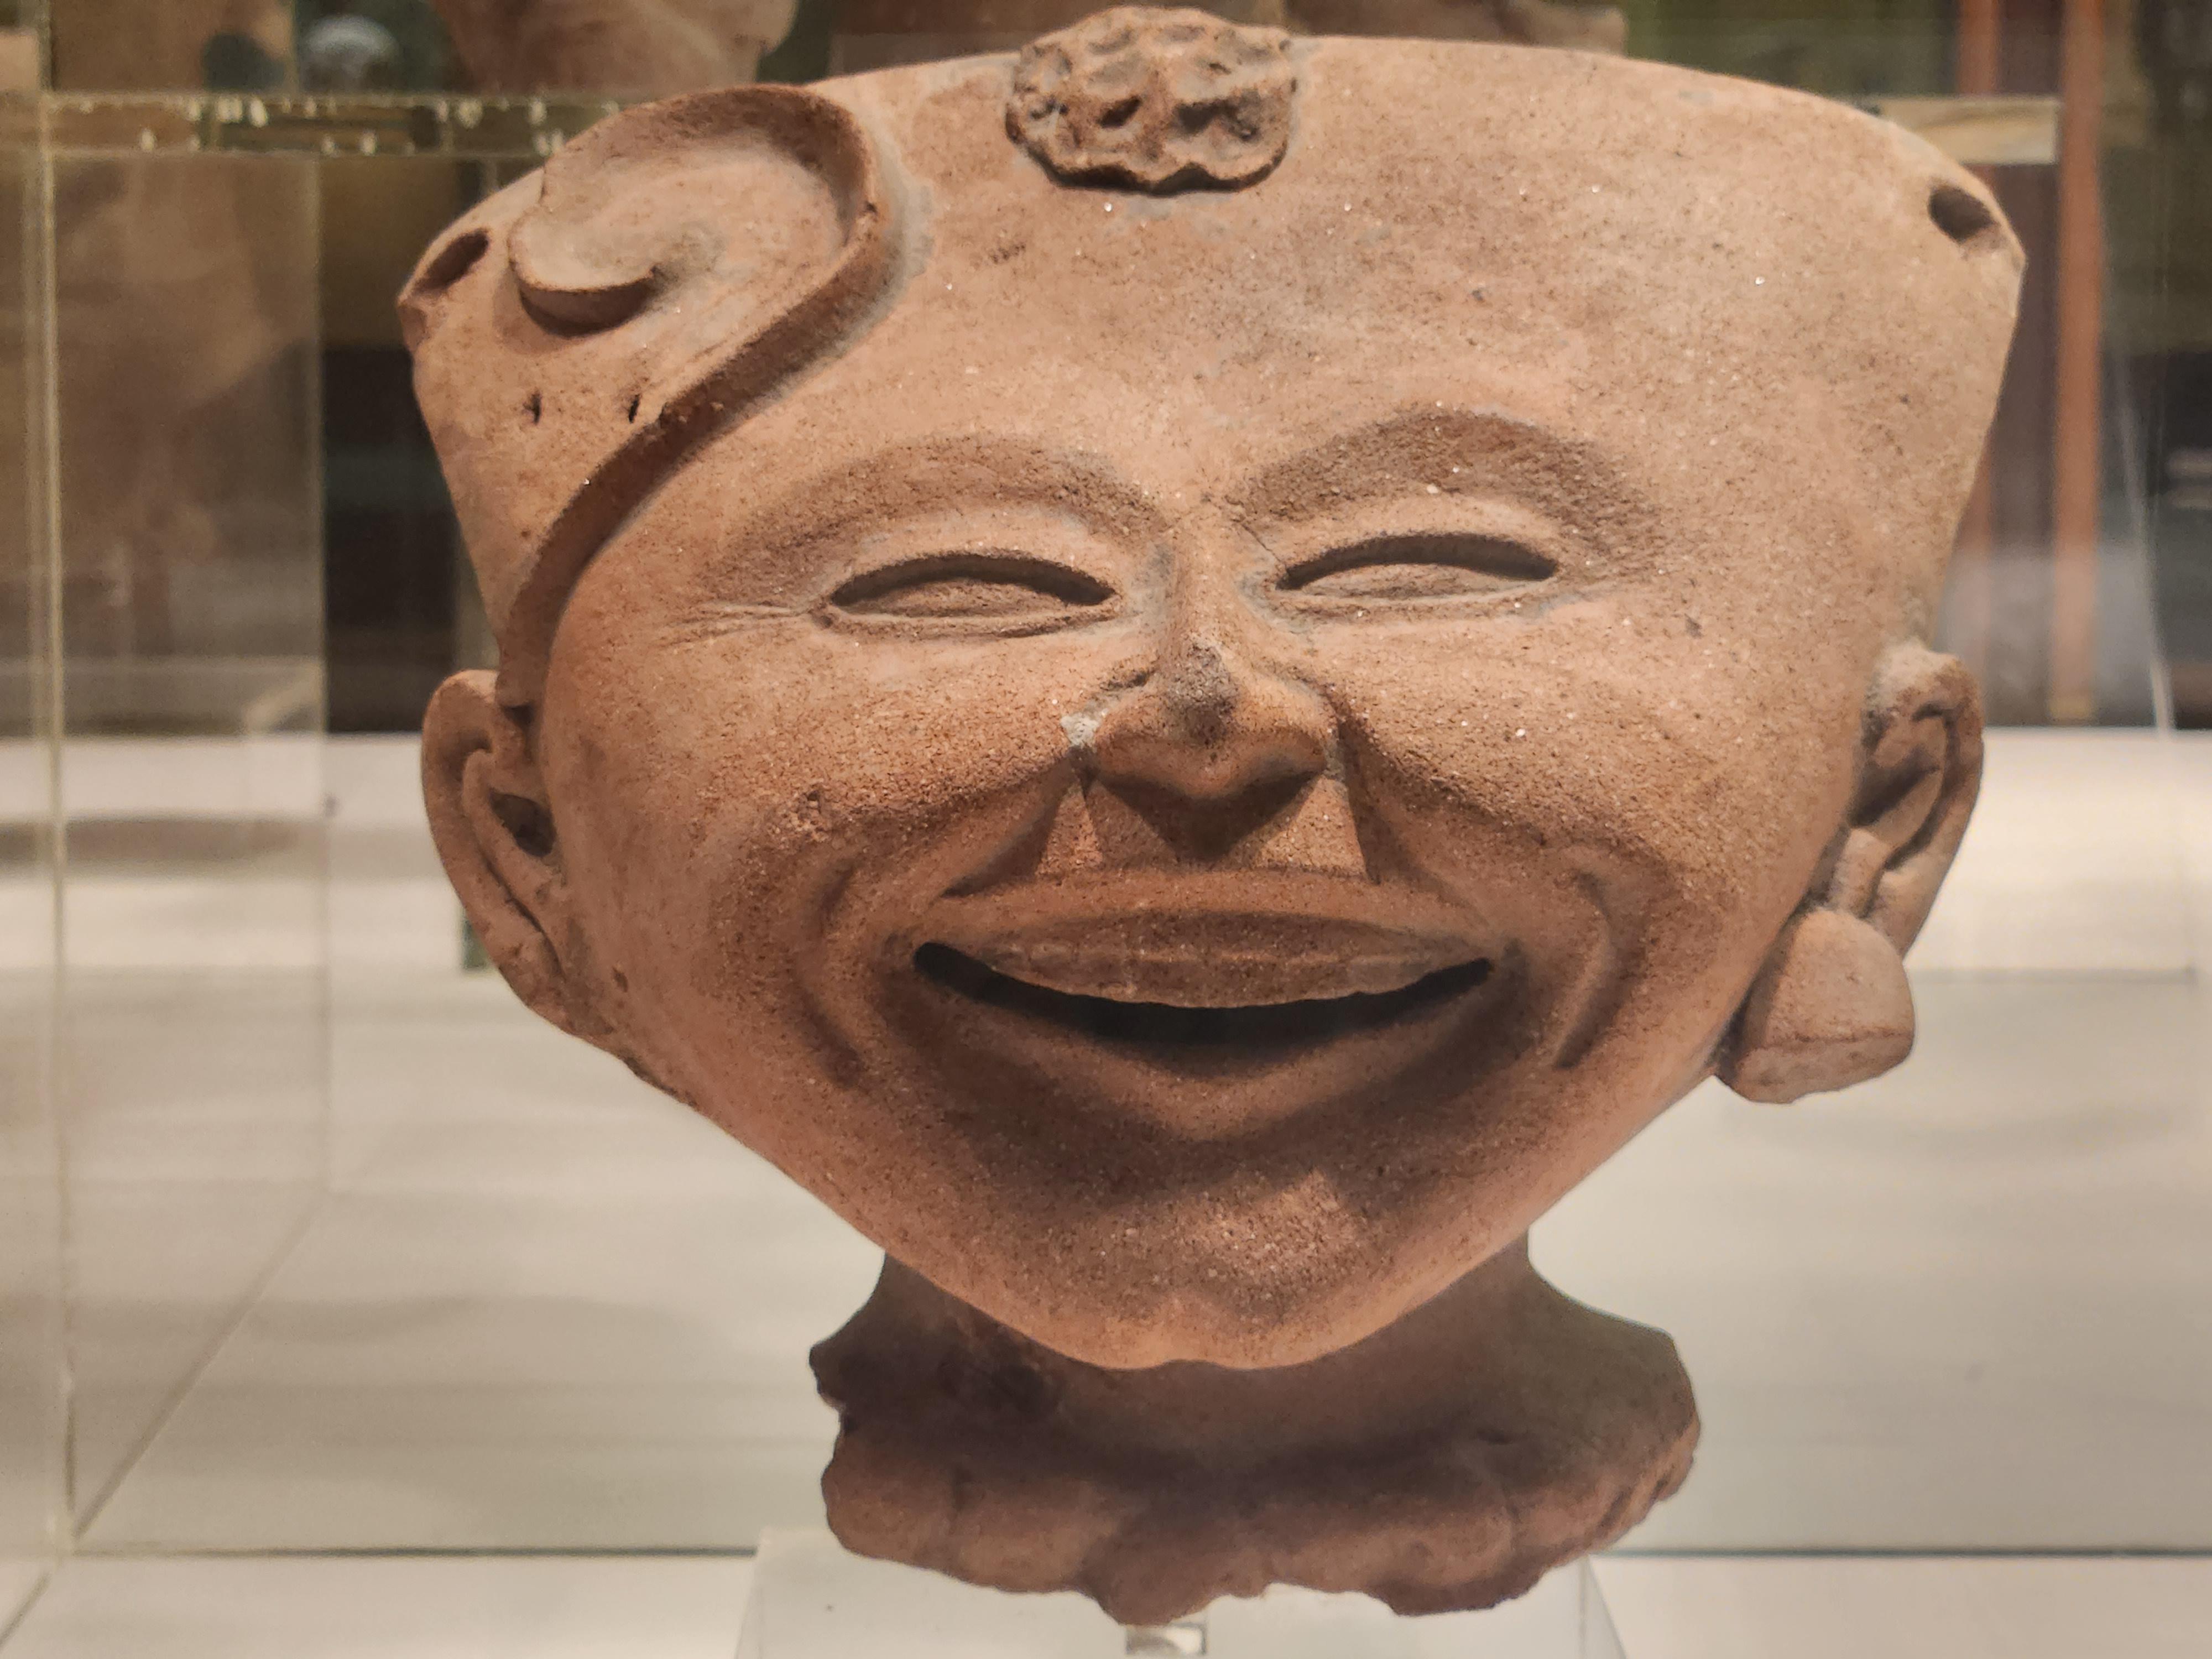 Late classic Remojadas style ceramic head from Veracruz, Mexico, ca. 600-800 AD. American Museum of Natural History collection.jpg